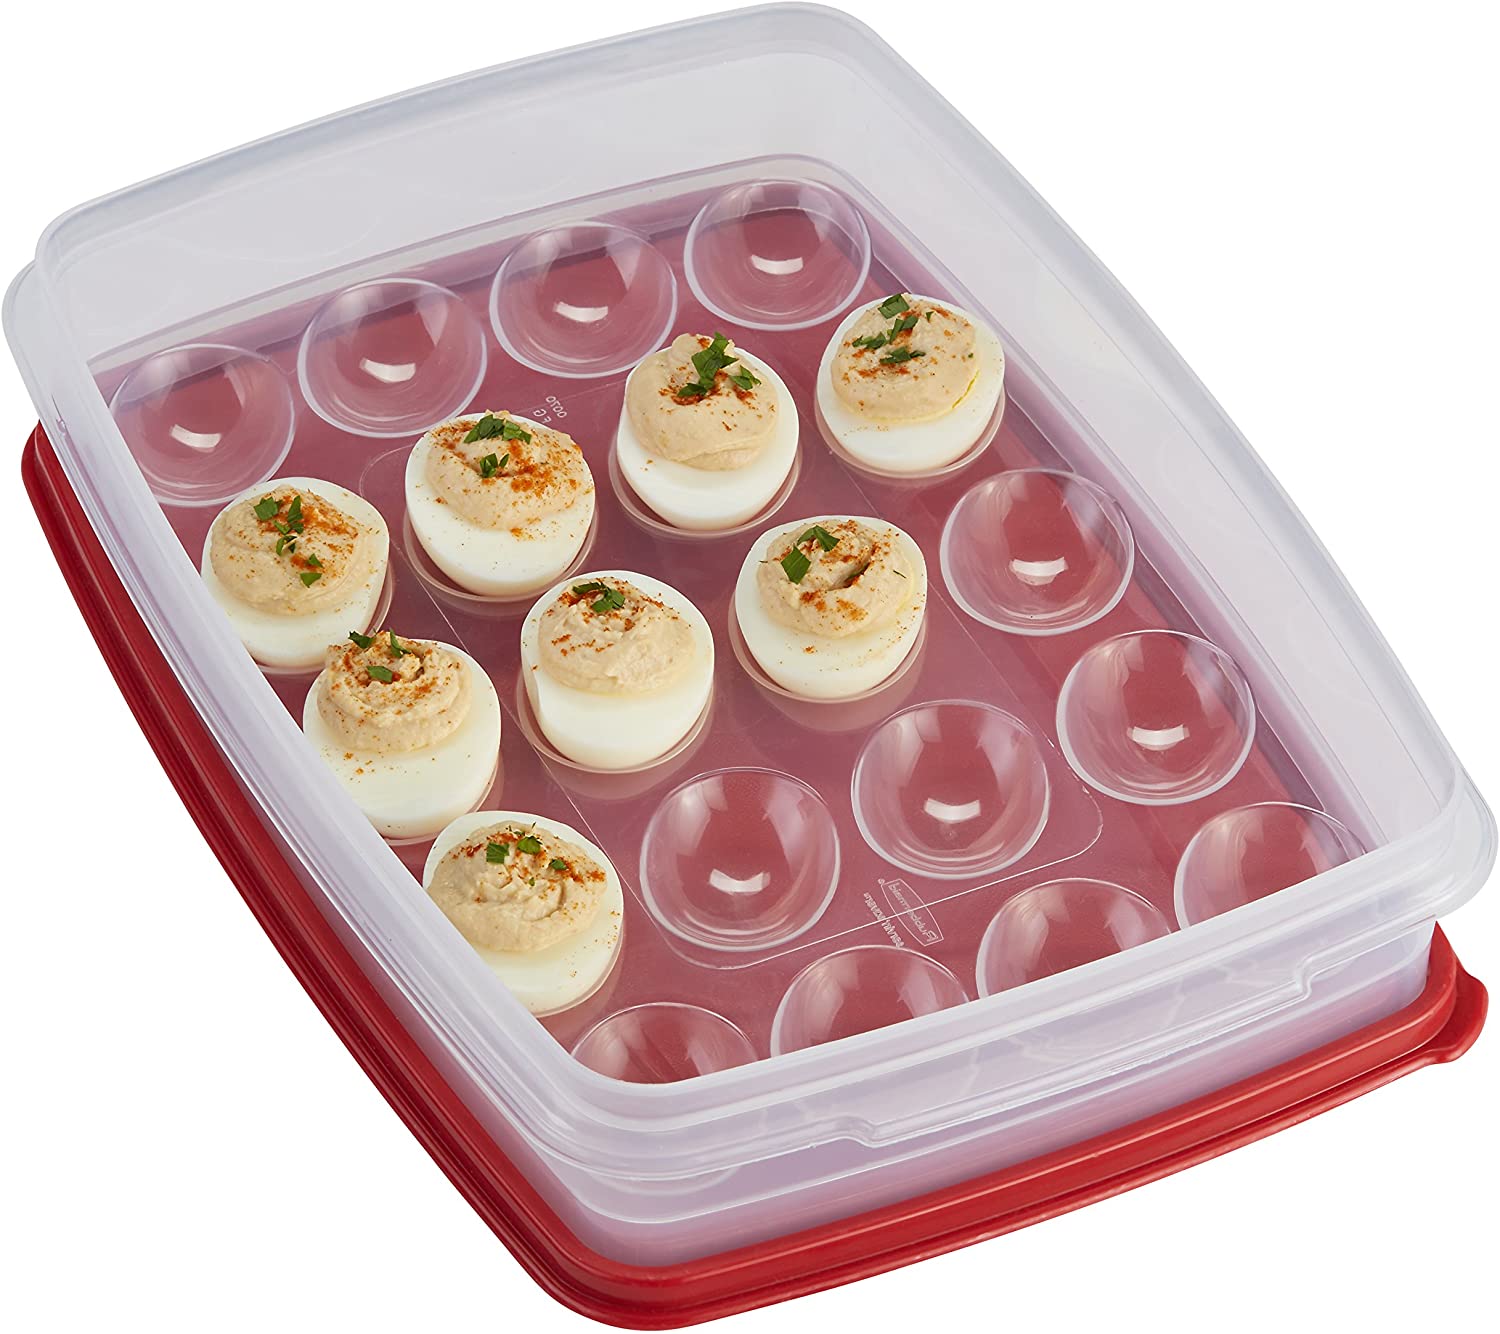 Rubbermaid Dedicated Storage Egg Keeper, Holds 20 Jumbo Eggs - Whole and All